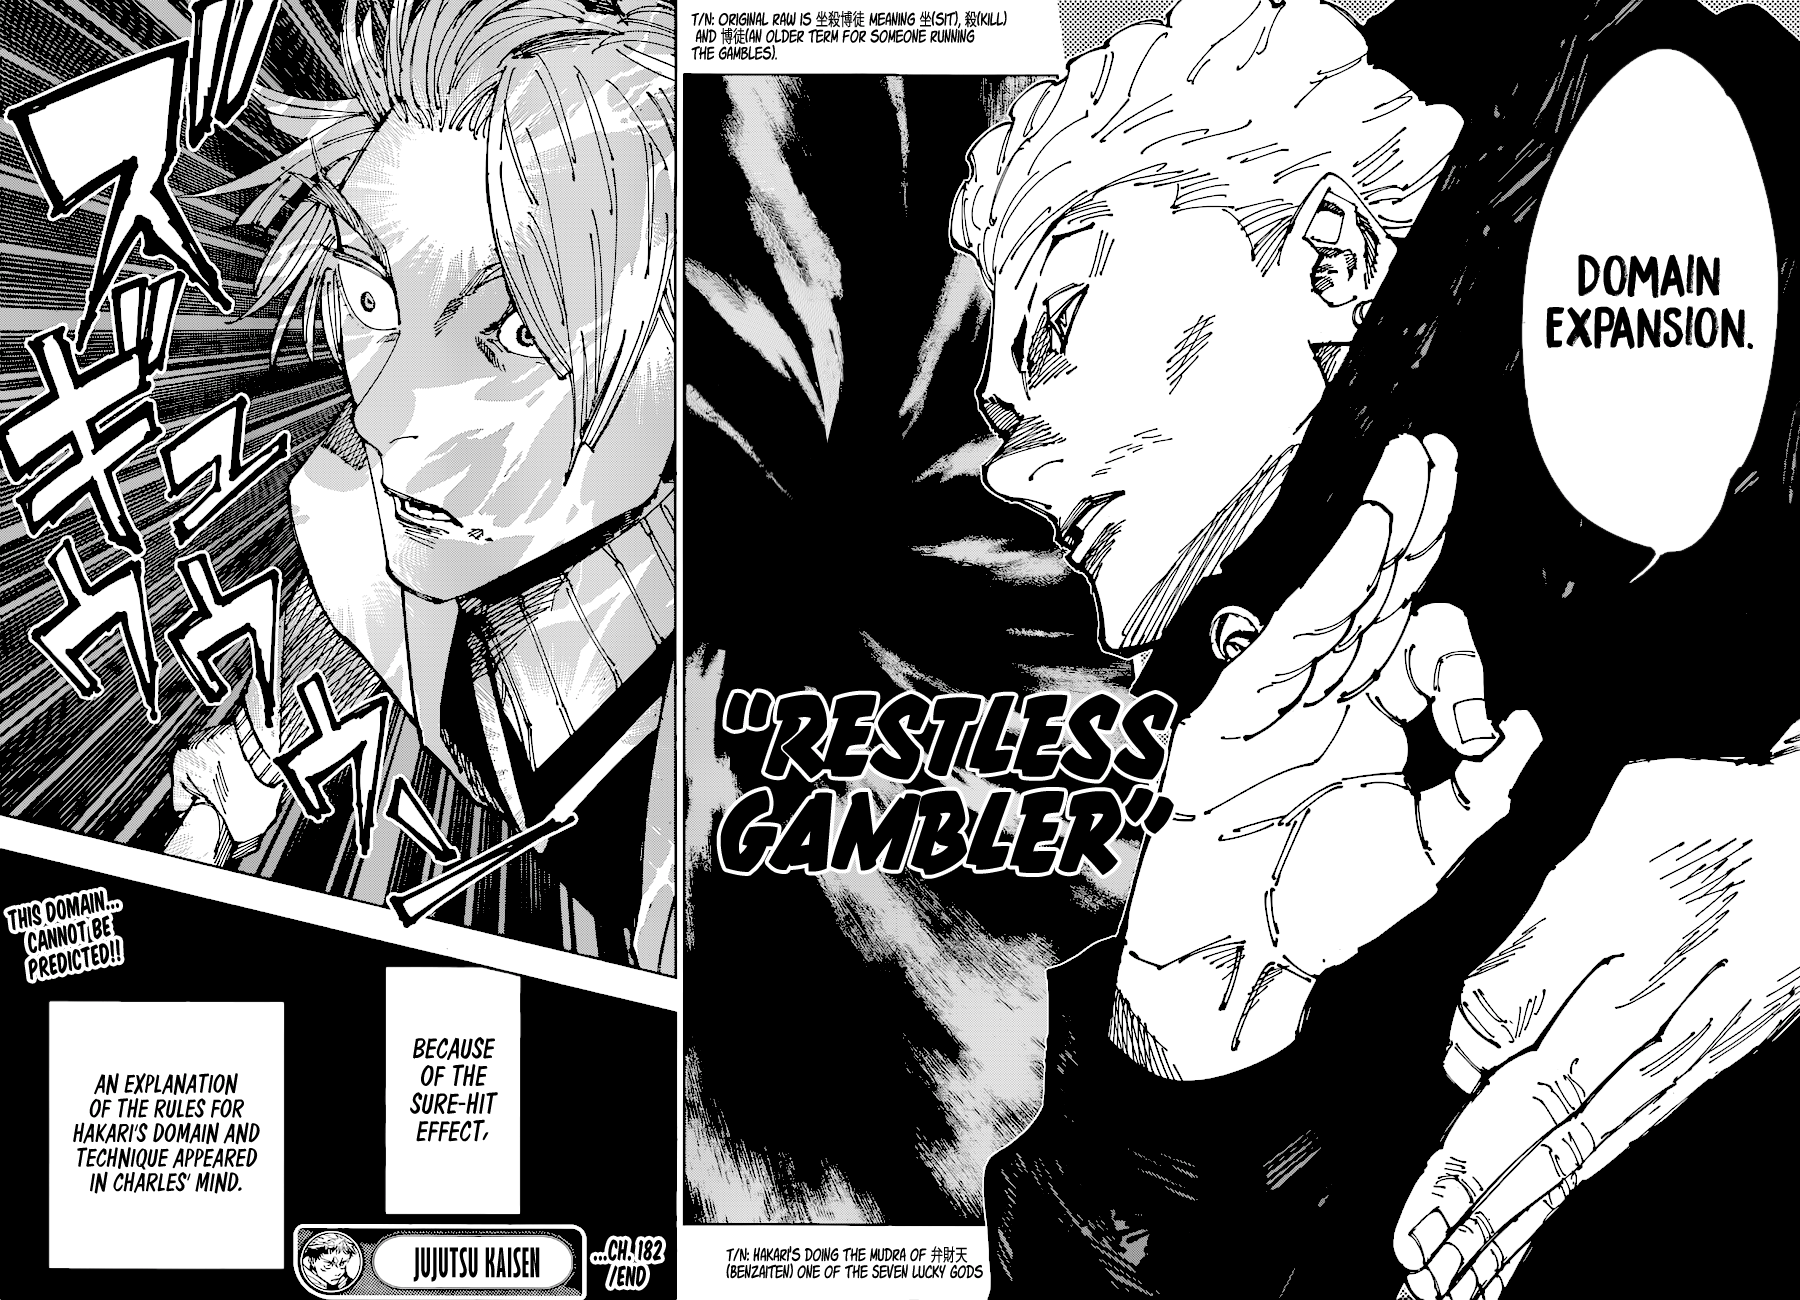 chapter 182